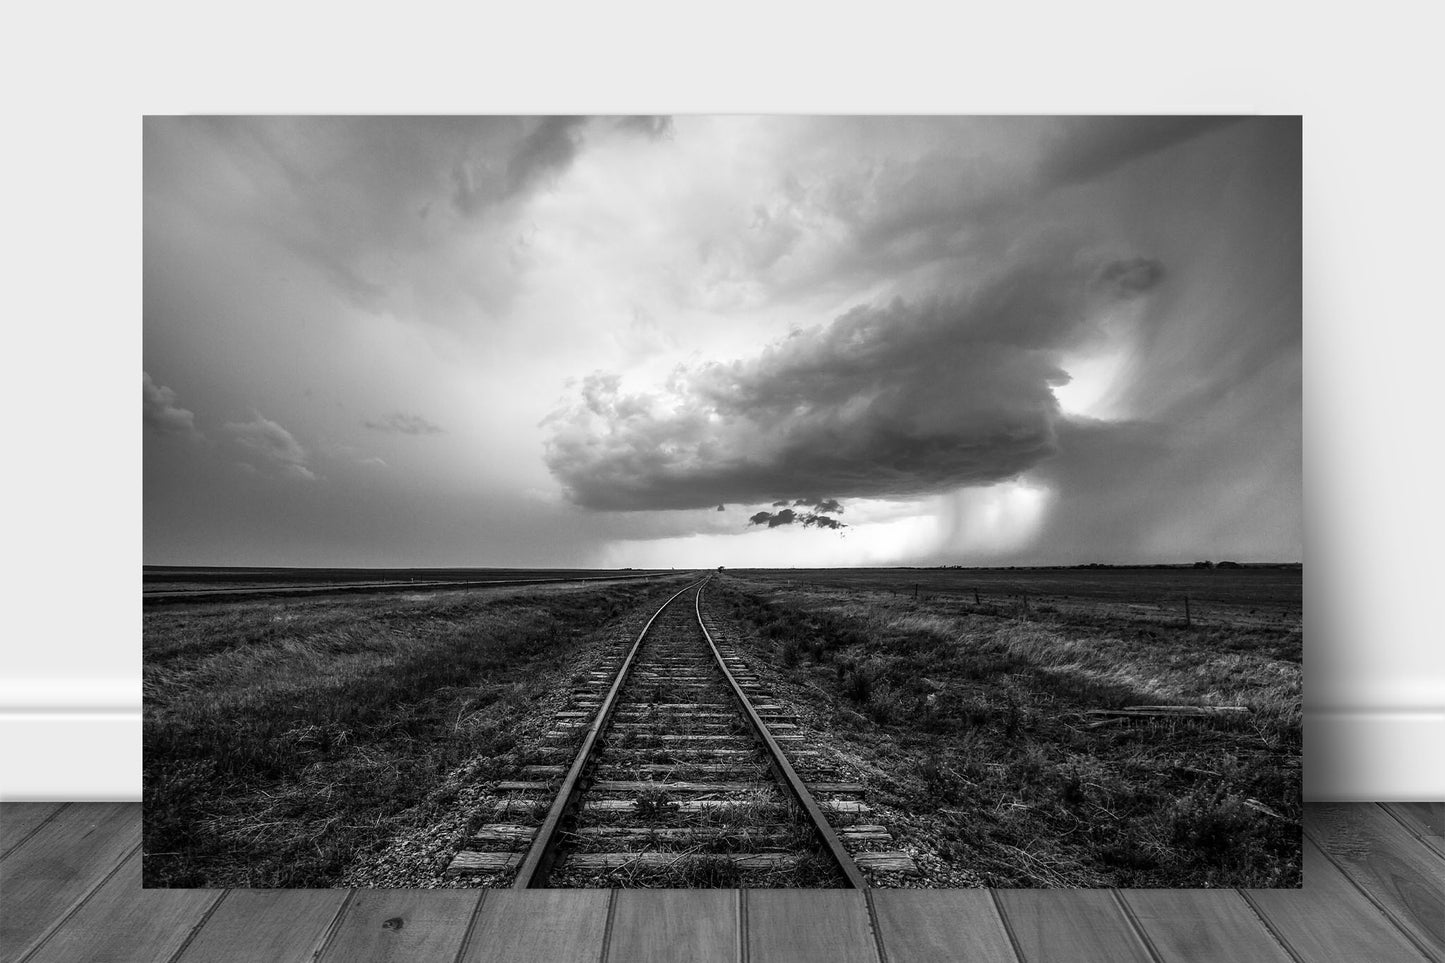 Wanderlust metal print of railroad tracks leading to a distant storm cloud on a stormy spring day on the plains of Kansas by Sean Ramsey of Southern Plains Photography.